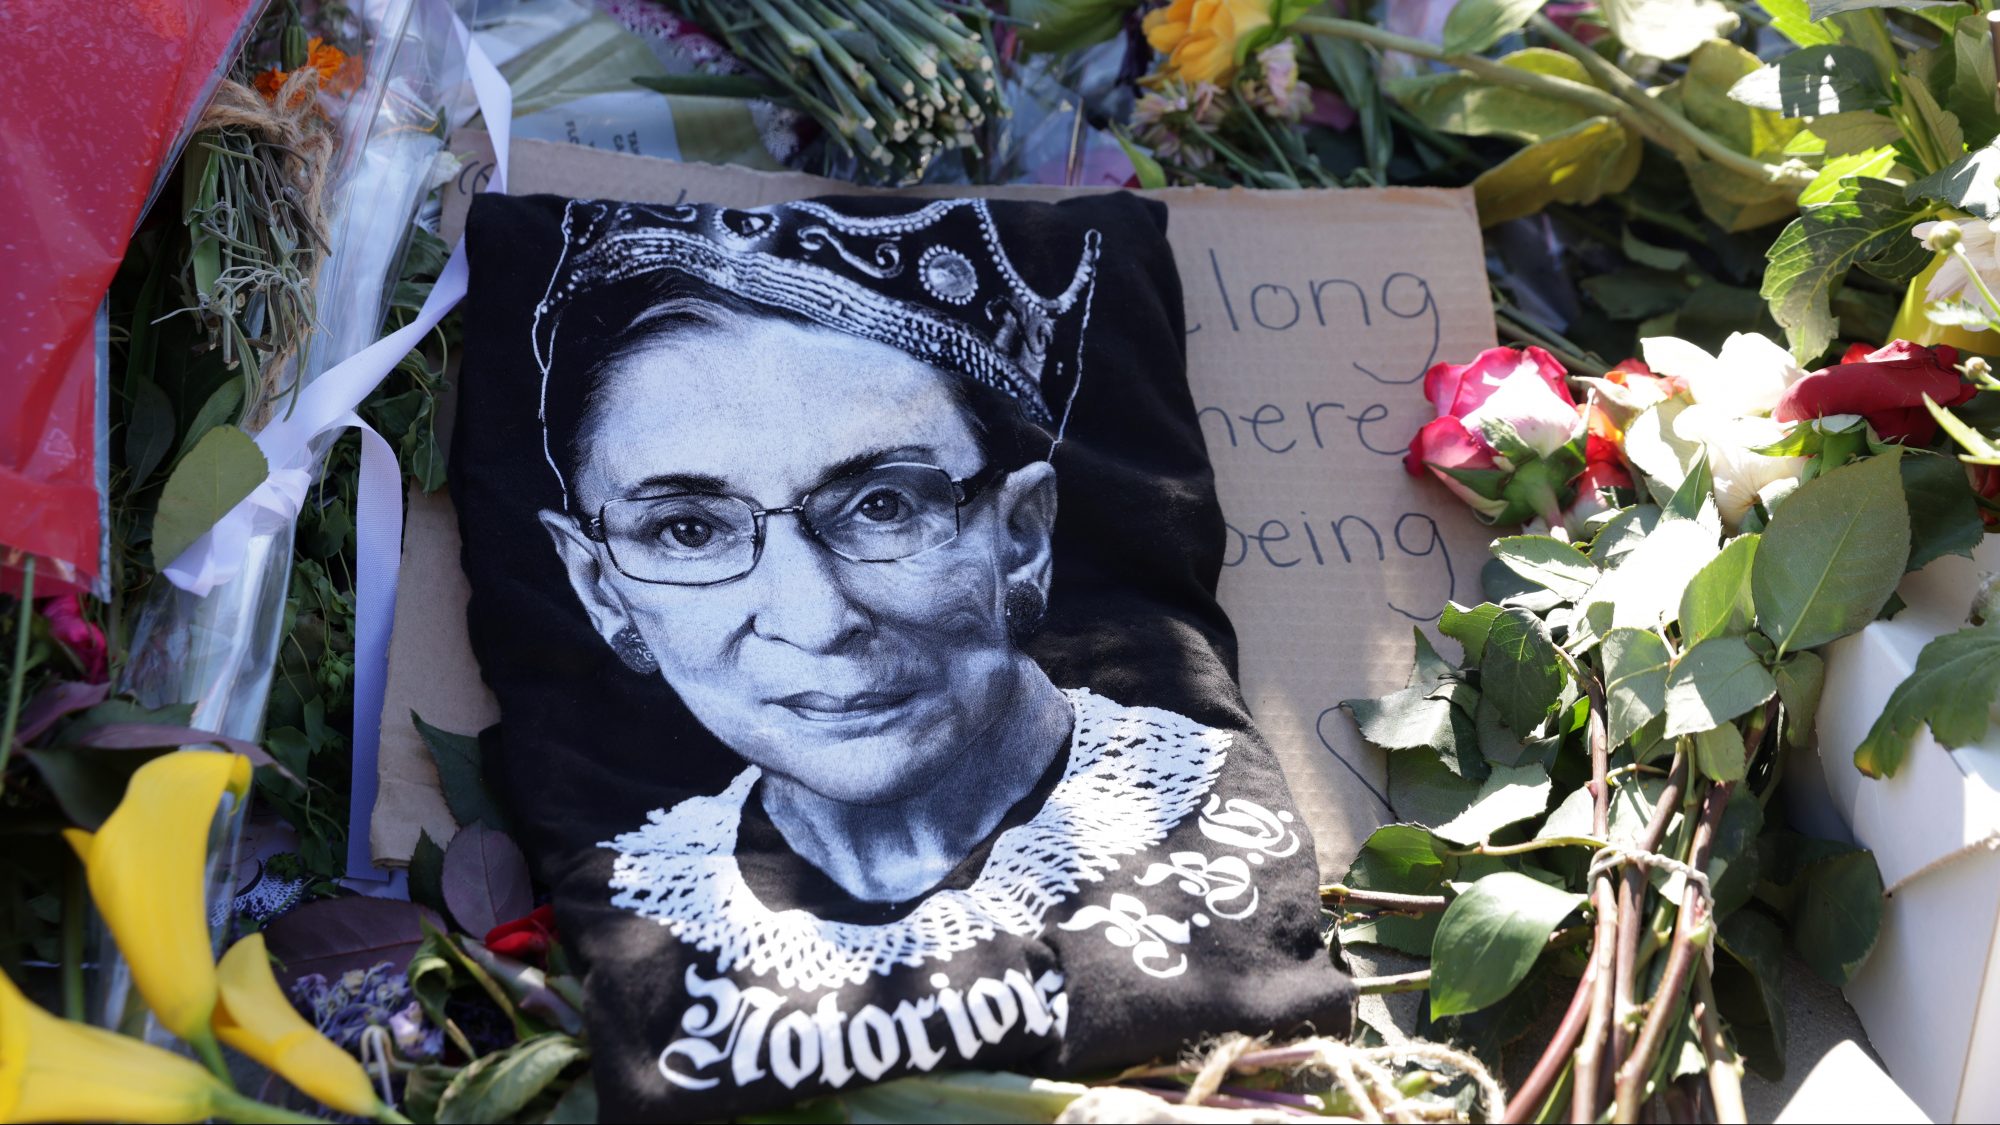 Signs and flowers are left at a makeshift memorial in front of the U.S. Supreme Court for the late Justice Ruth Bader Ginsburg September 21, 2020 in Washington, DC.